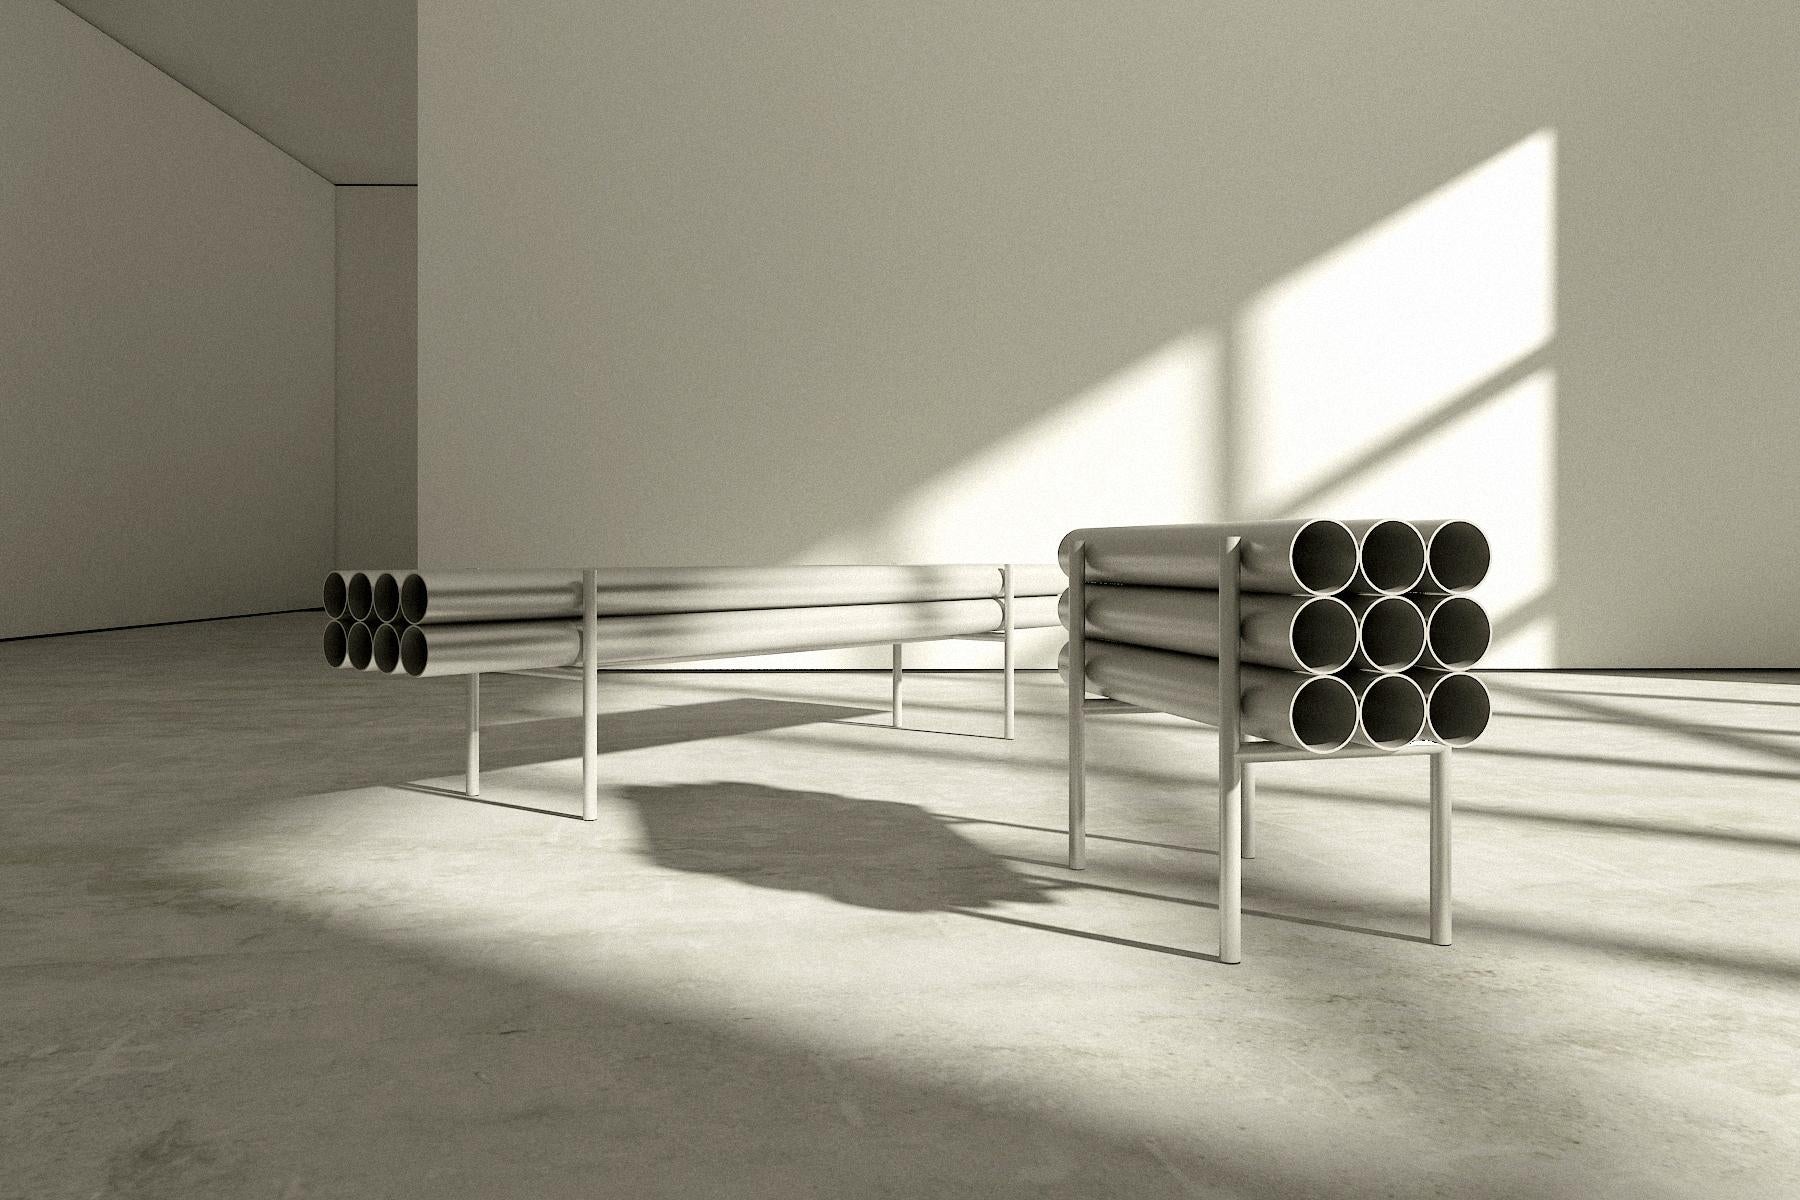 Polished Aluminum Sleek bench, perfect for indoors or outdoors. This long chromed like bench exists at a cross section between sculpture, design, and furniture design. Eight individual polished aluminum tubes seem like floating in space.  

Deon